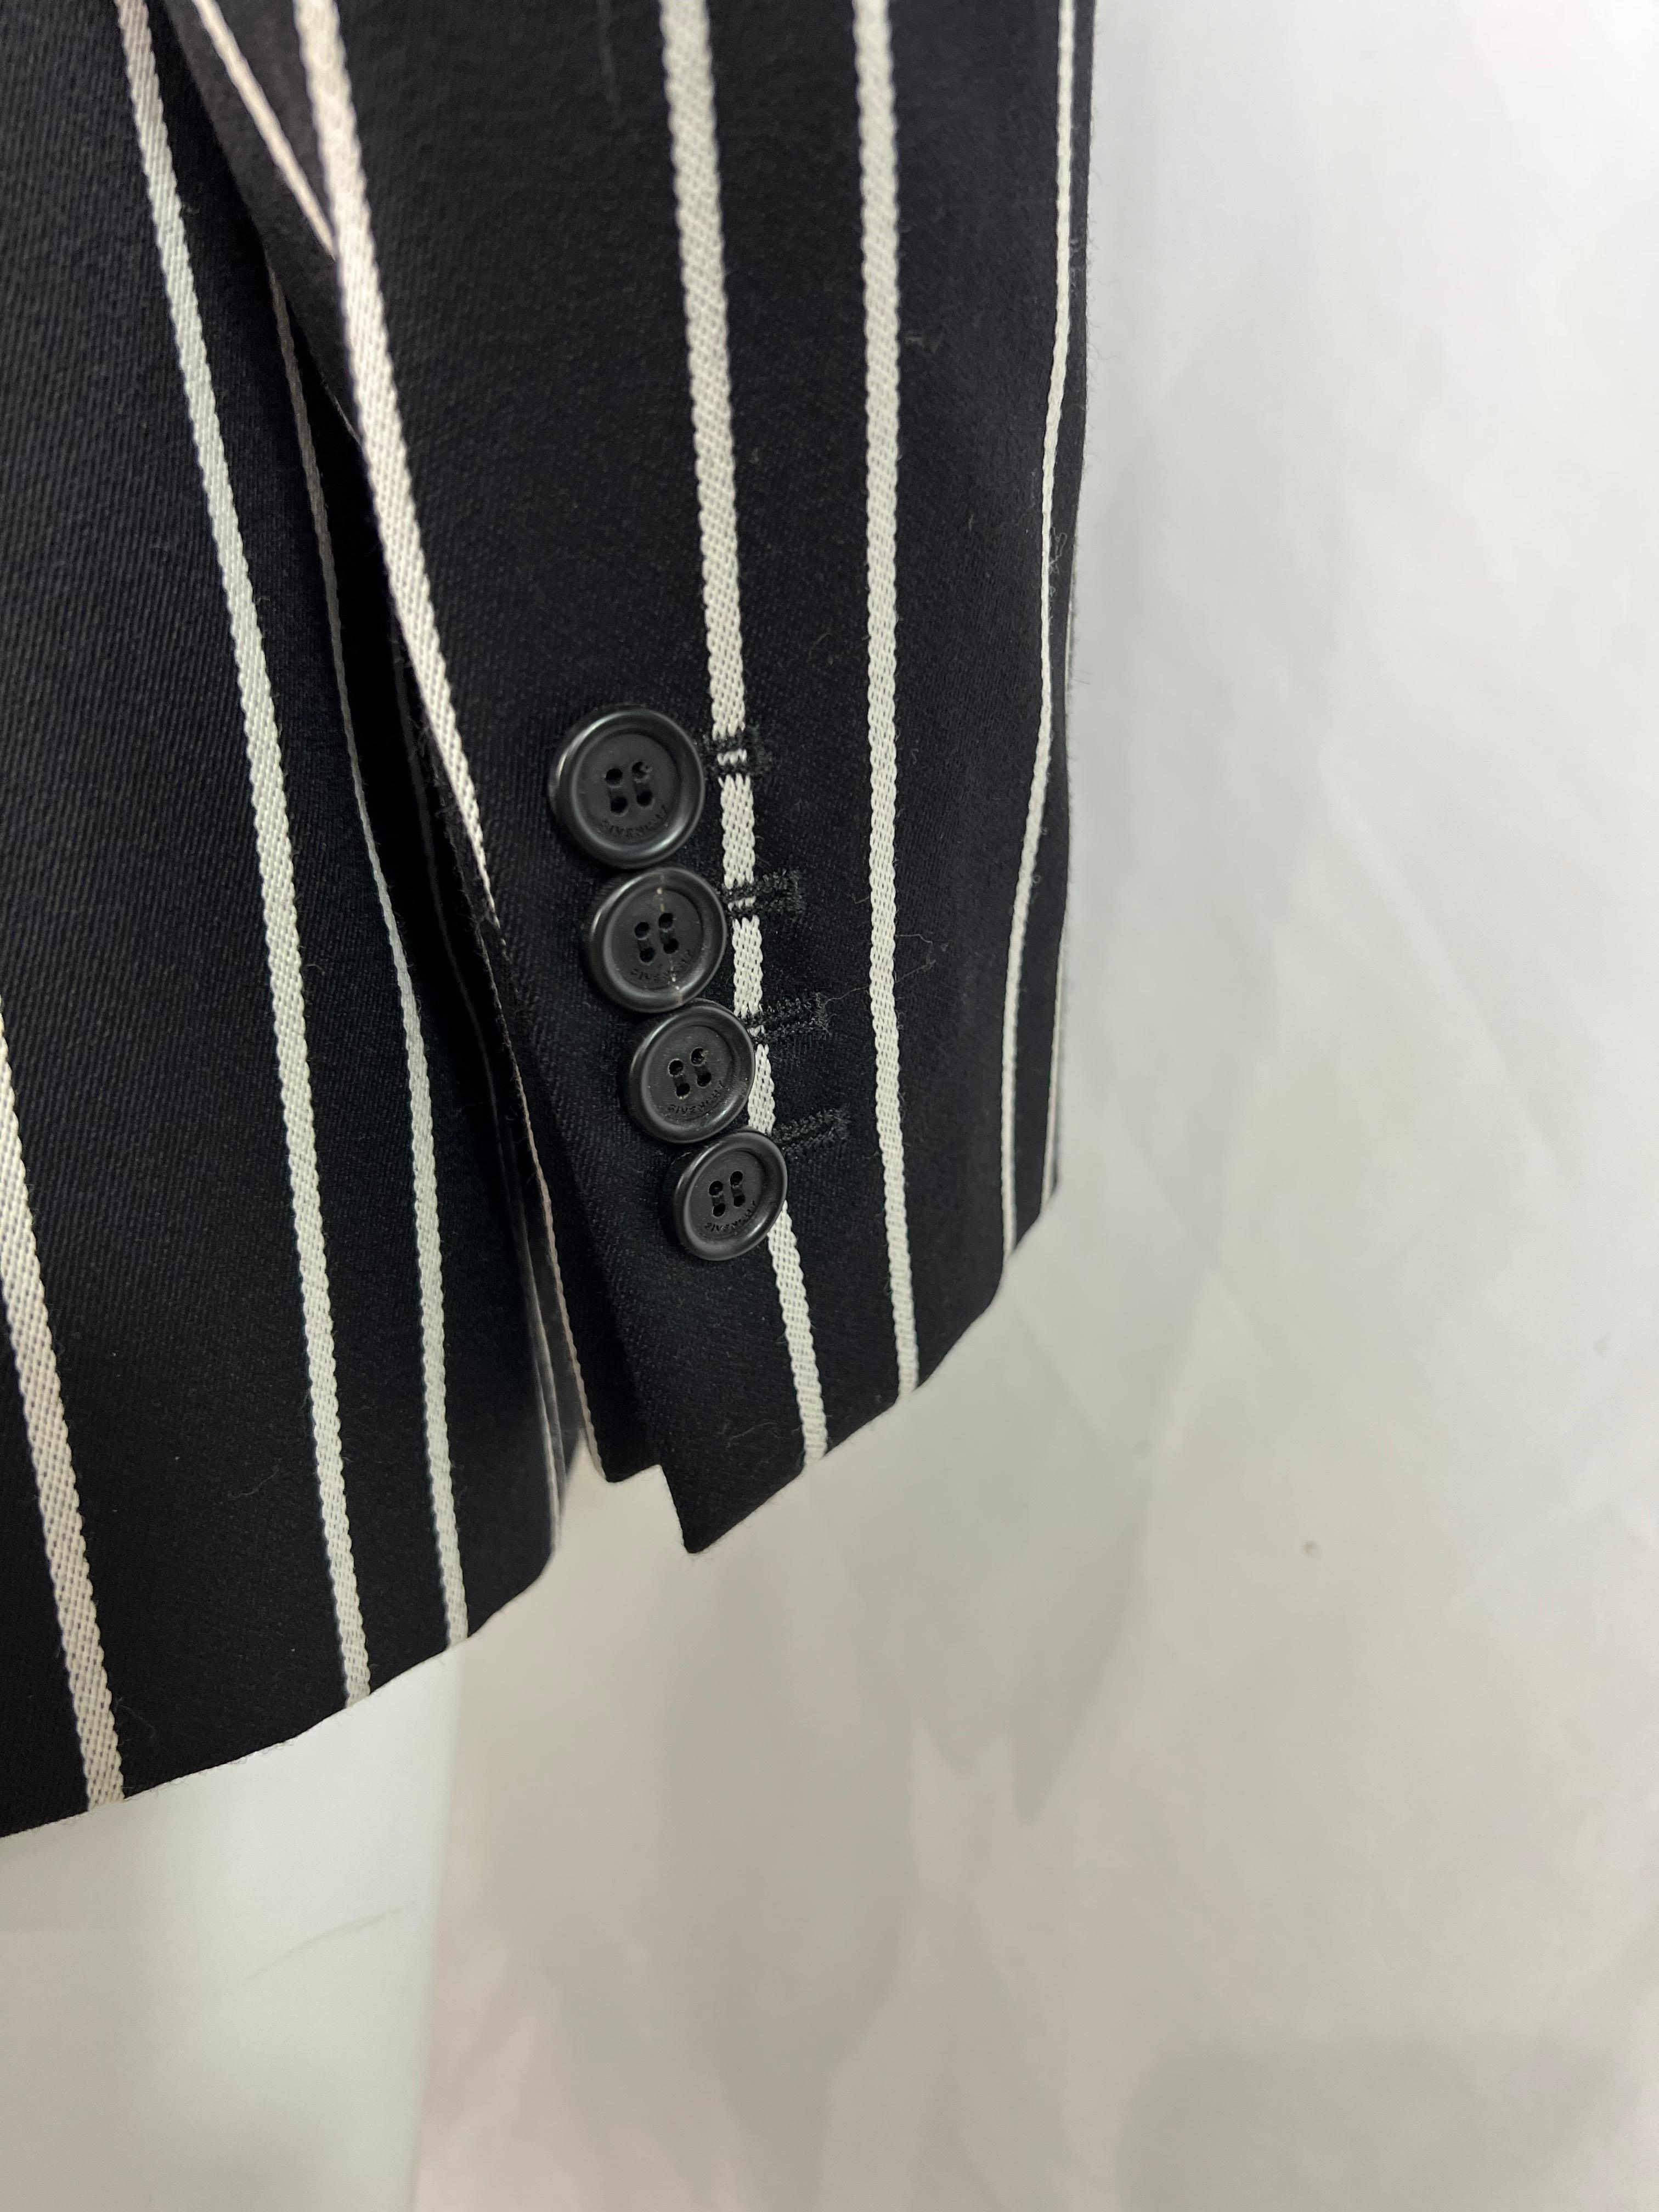 Givenchy Black and White Blazer Jacket, Size 40 For Sale 1